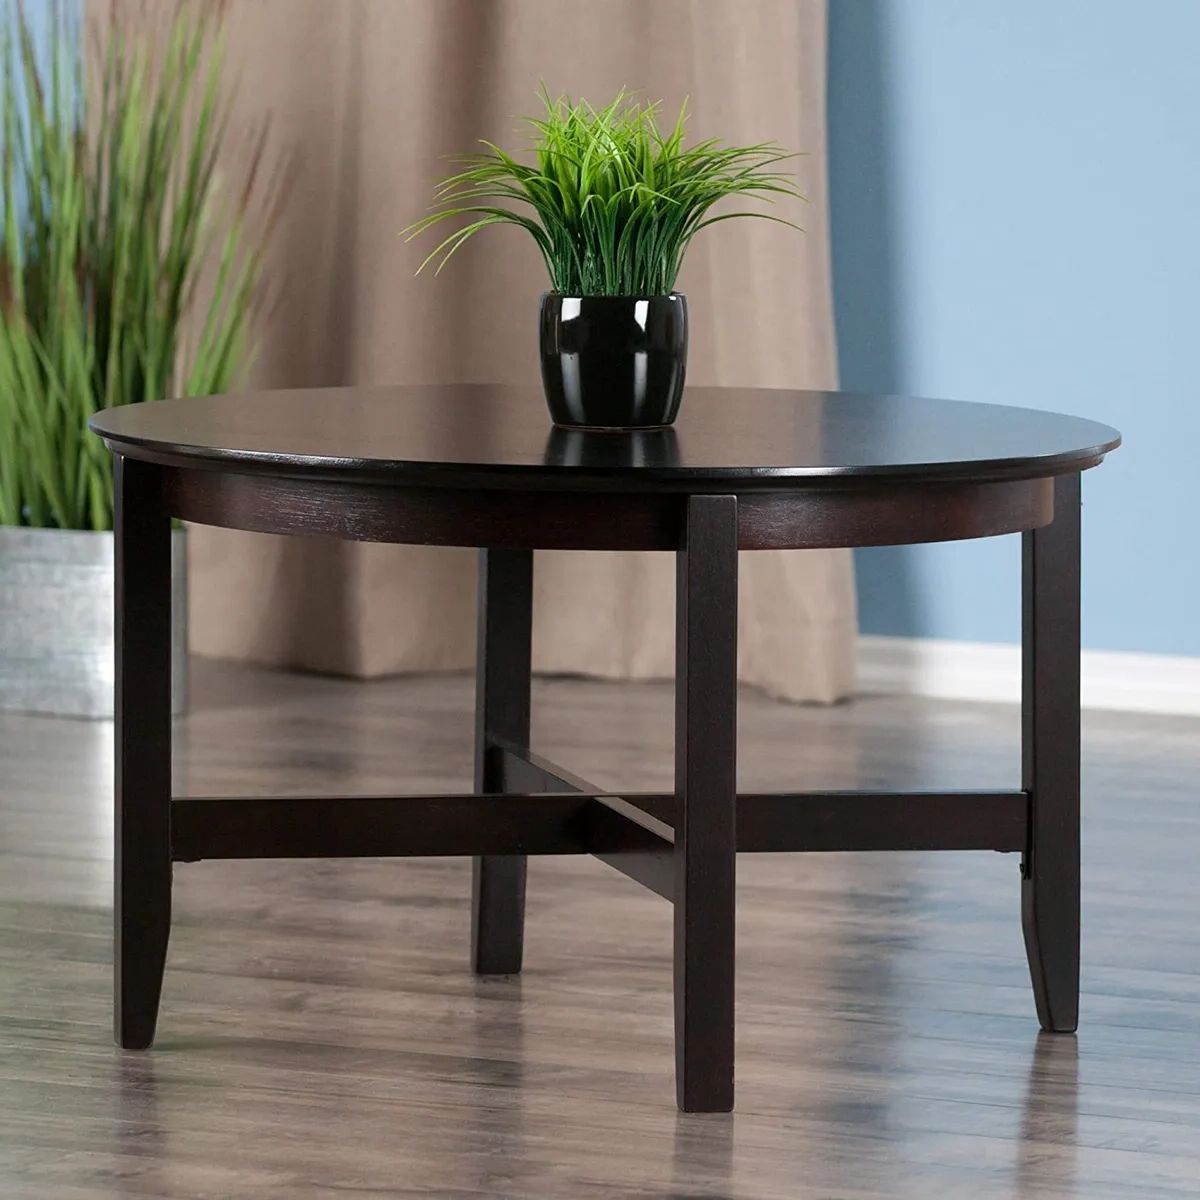 Espresso Wood Finish Coffee Tables With Favorite 30" Solid Wood Round Coffee Table Modern Living Room Furniture Espresso  Finish (View 7 of 10)